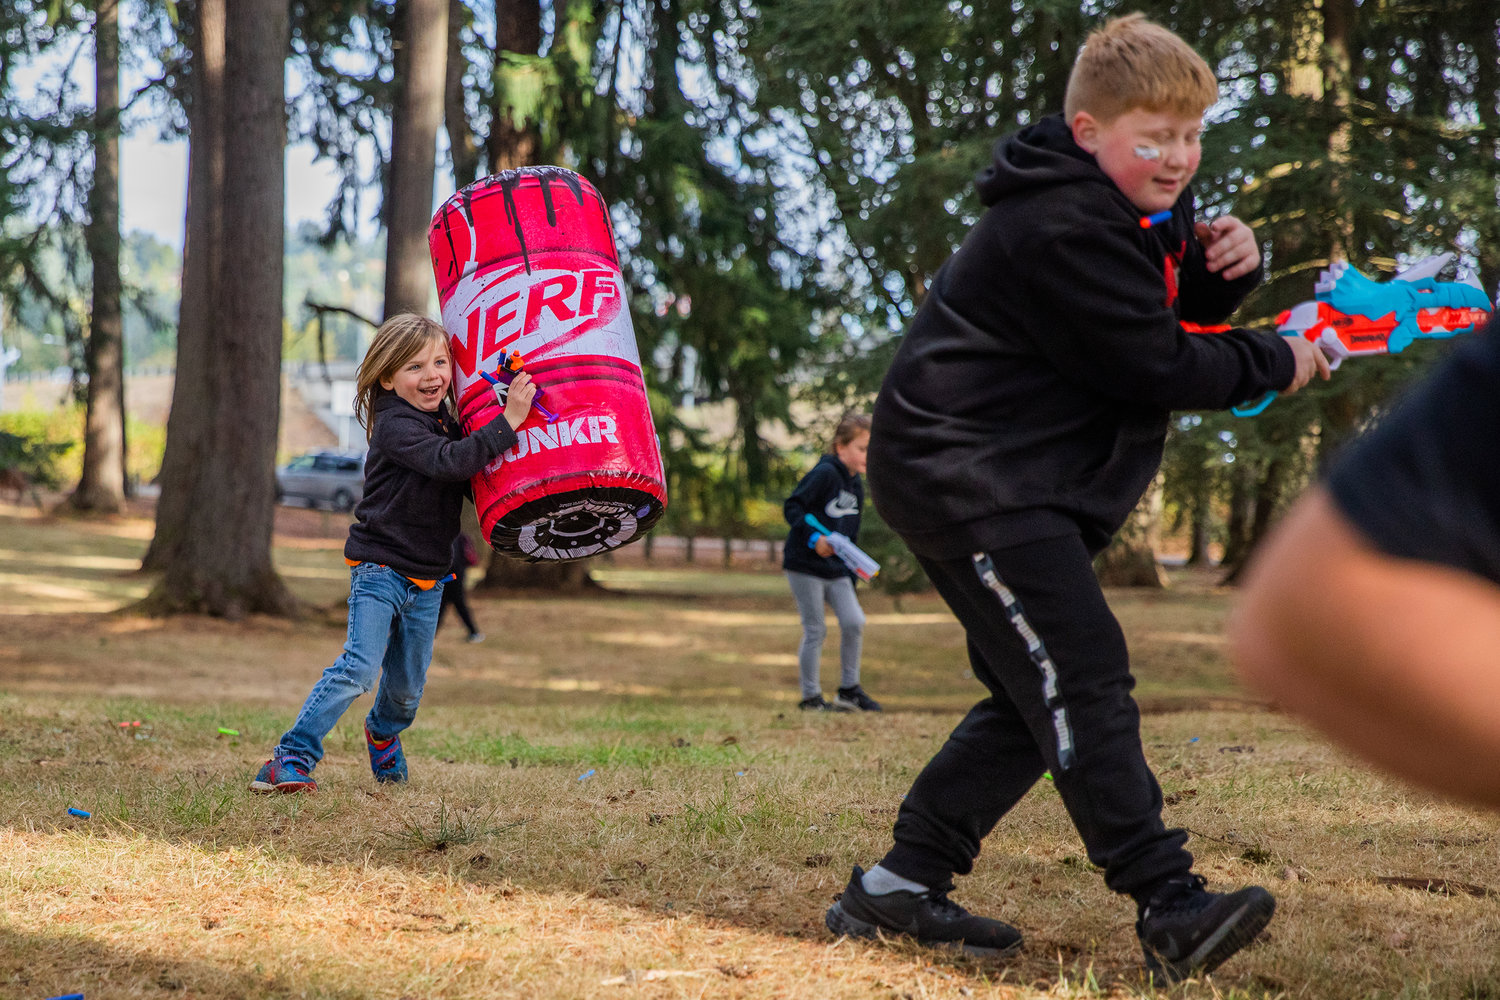 Bullets fly as kids laugh while attempting to dodge and hide Sunday during a Nerf War at Borst Park in Centralia.